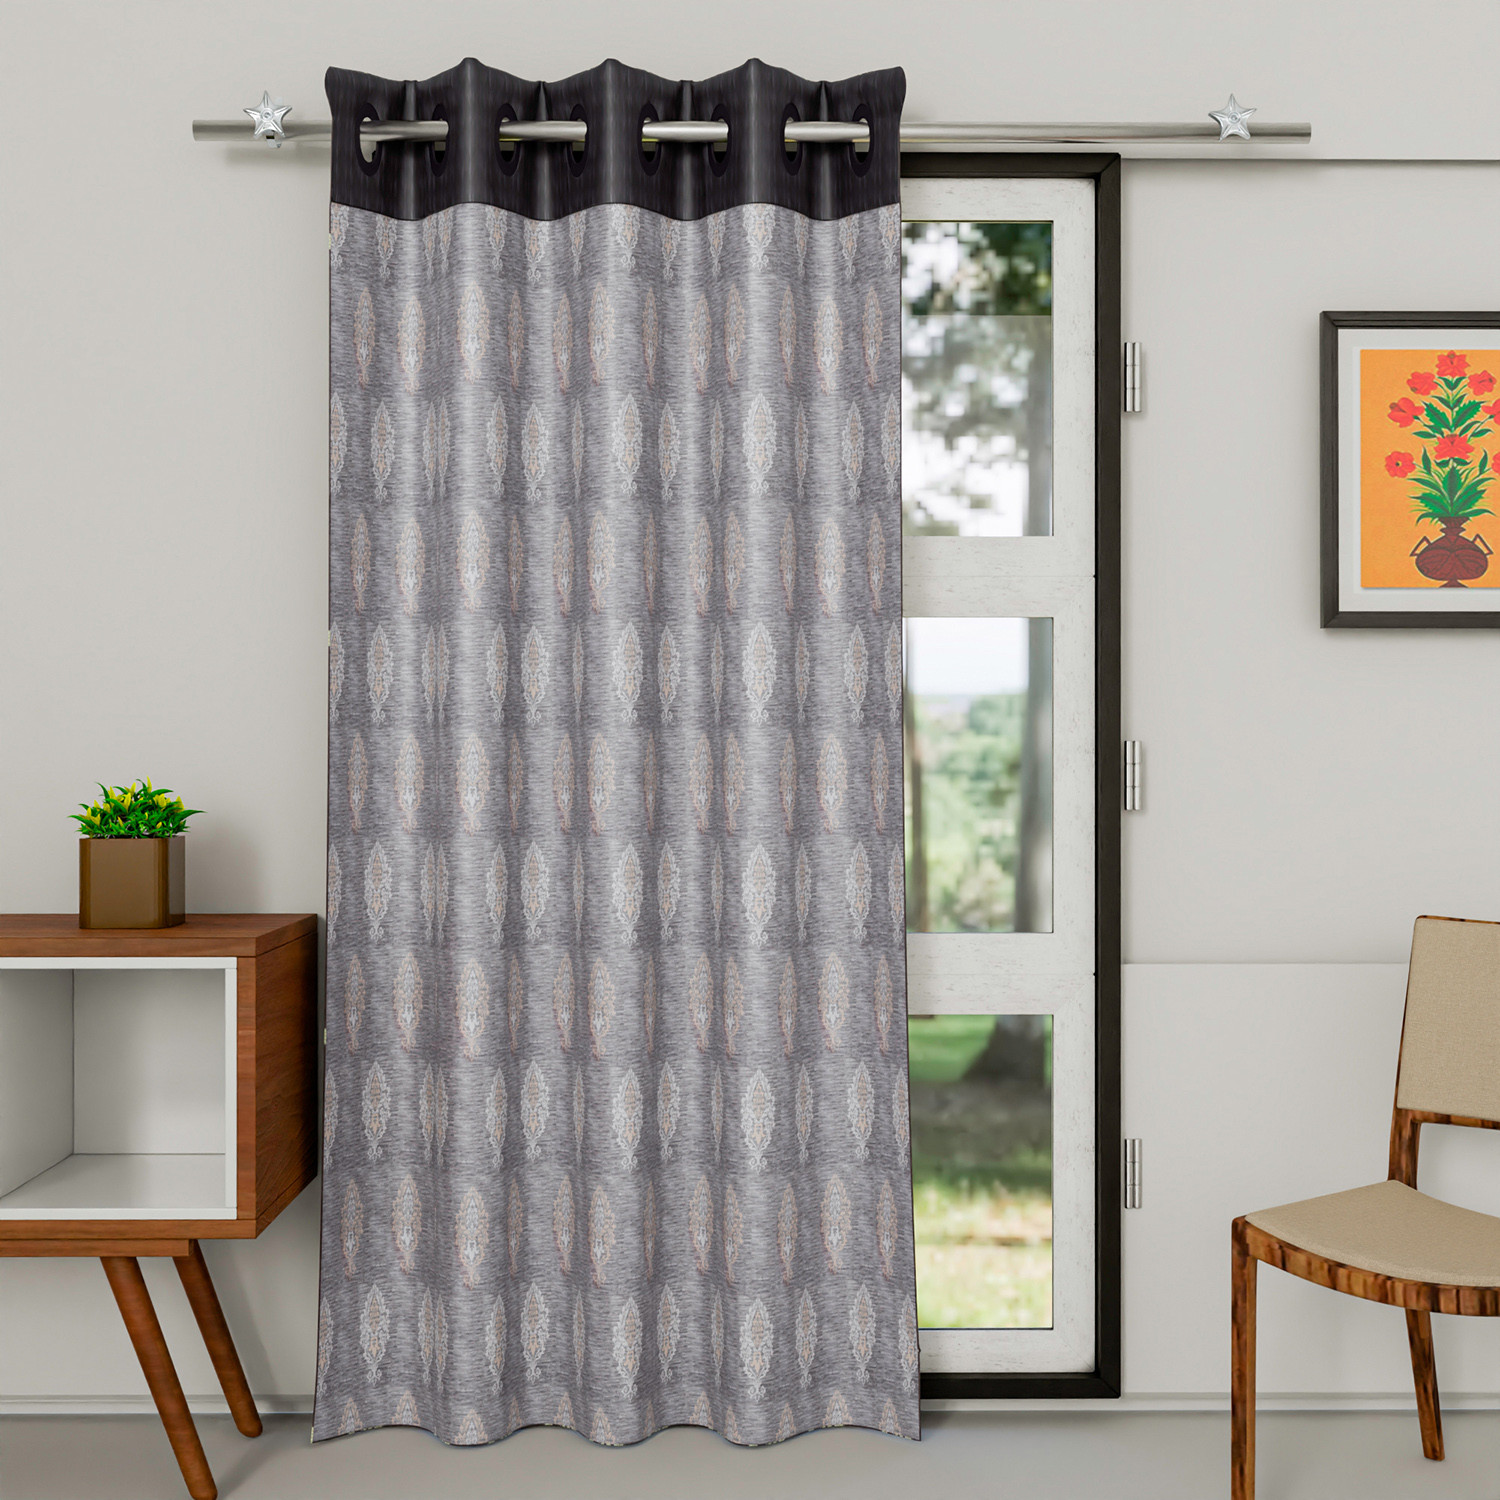 Kuber Industries Faux Silk Decorative 9 Feet Long Door Curtain | Damask Print Blackout Drapes Curtain With 8 Eyelet For Home & Office (Gray)